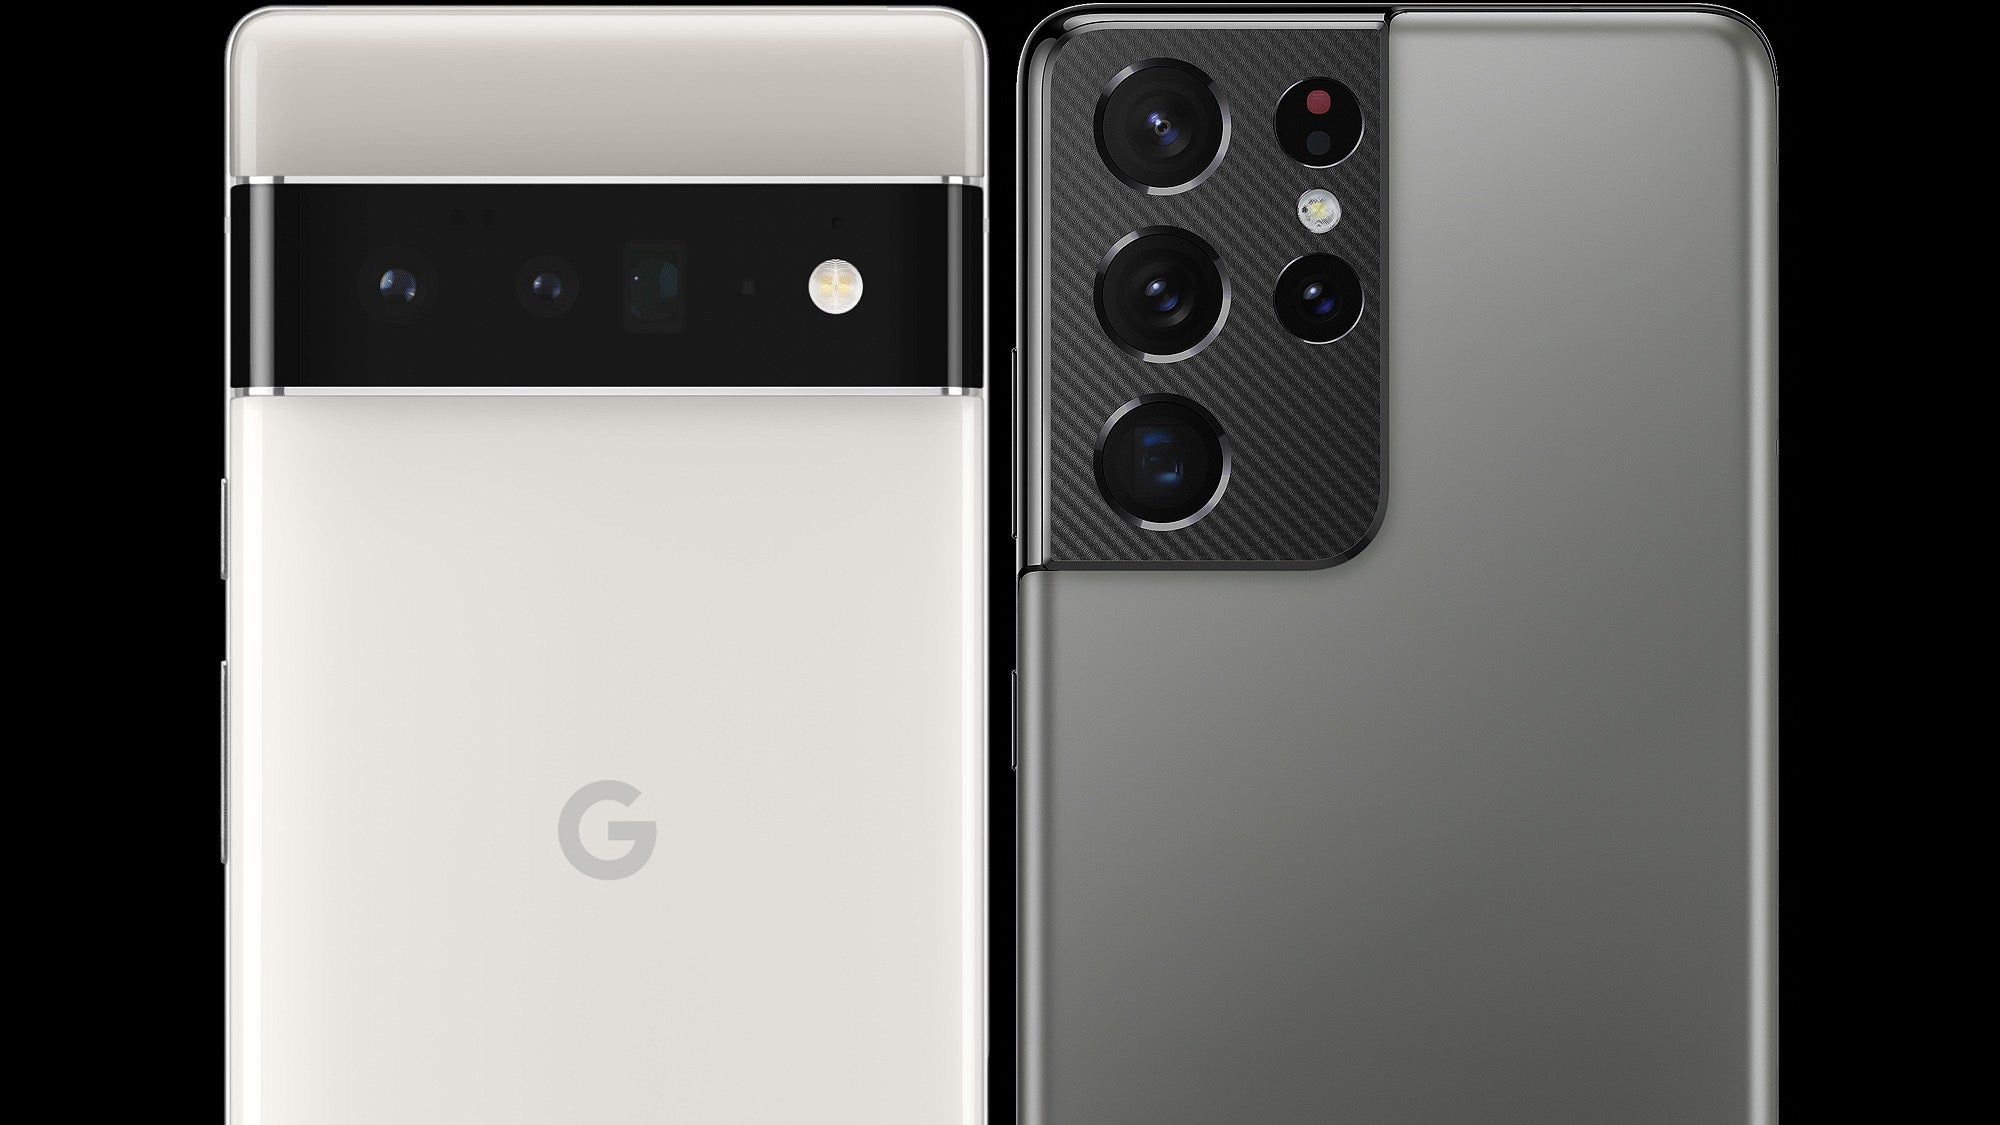 The Pixel 6 Pro finally does away with the camera island in favor of a strip that won't wobble - Google Pixel 6 Pro vs Samsung Galaxy S21 Ultra